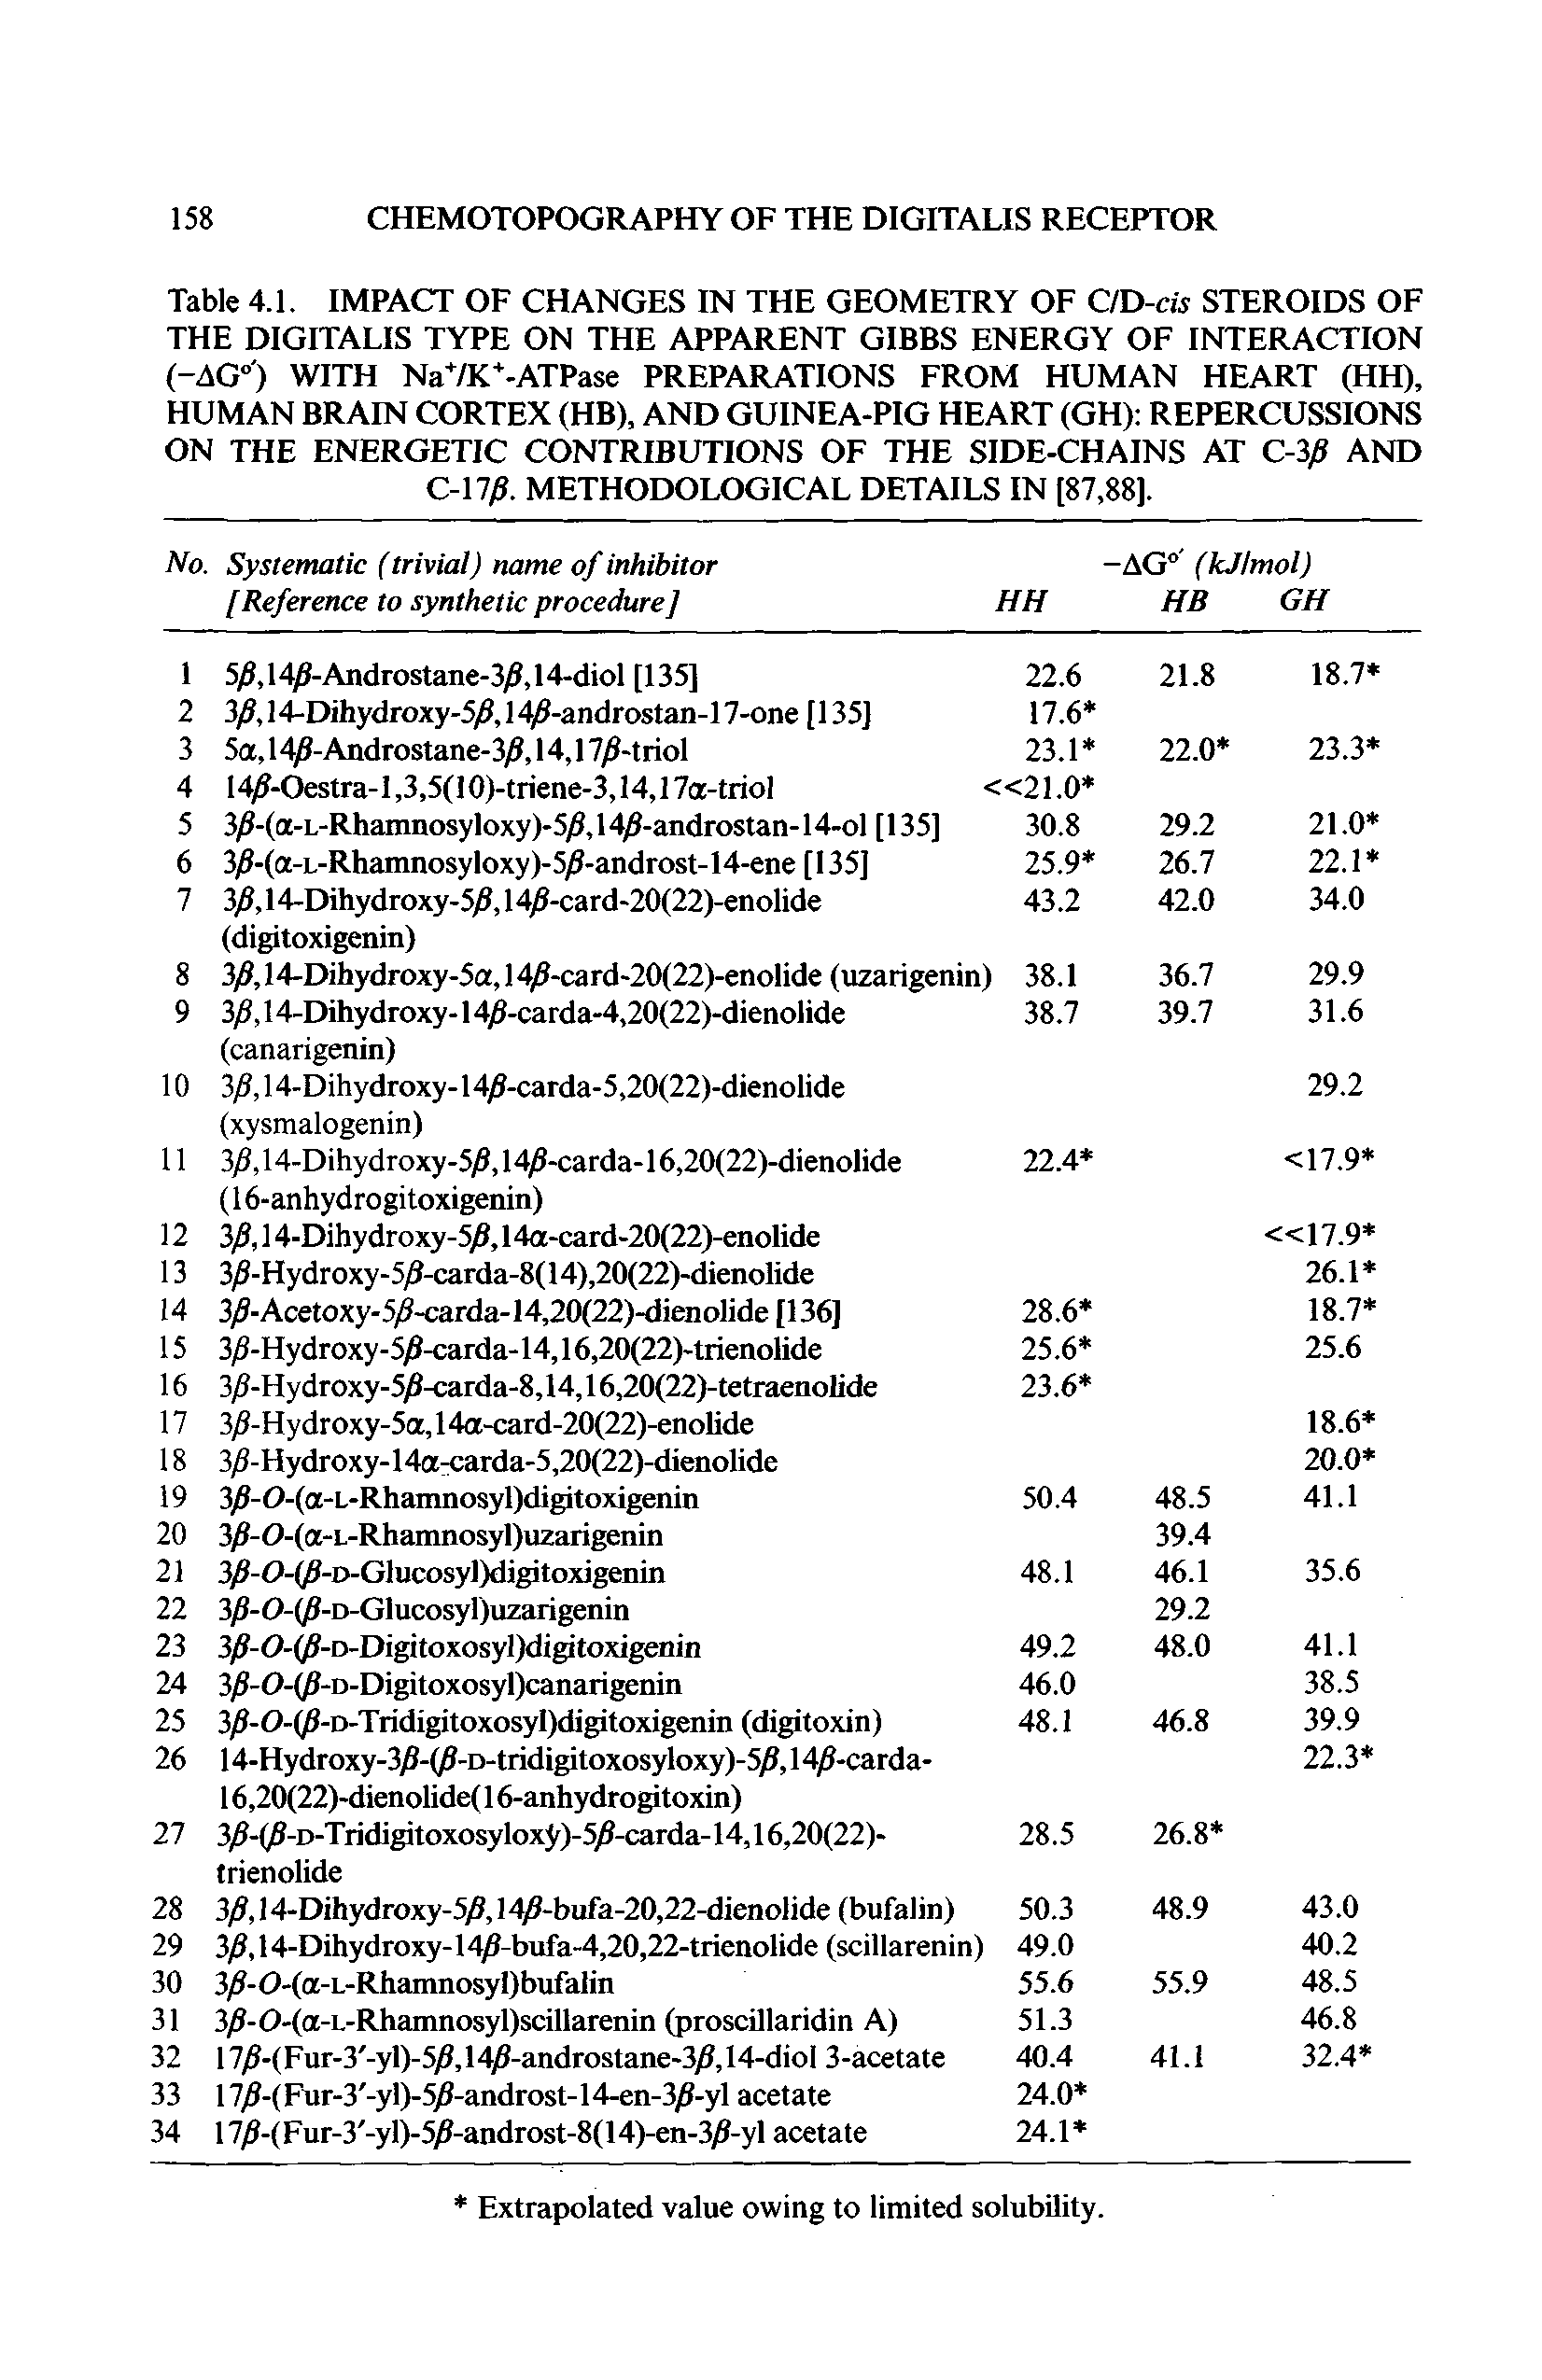 Table 4.1. IMPACT OF CHANGES IN THE GEOMETRY OF CID-cis STEROIDS OF THE DIGITALIS TYPE ON THE APPARENT GIBBS ENERGY OF INTERACTION (-AG ) WITH NaYK -ATPase PREPARATIONS FROM HUMAN HEART (HH), HUMAN BRAIN CORTEX (HB), AND GUINEA-PIG HEART (GH) REPERCUSSIONS ON THE ENERGETIC CONTRIBUTIONS OF THE SIDE-CHAINS AT C-3fi AND C-np. METHODOLOGICAL DETAILS IN [87,88].